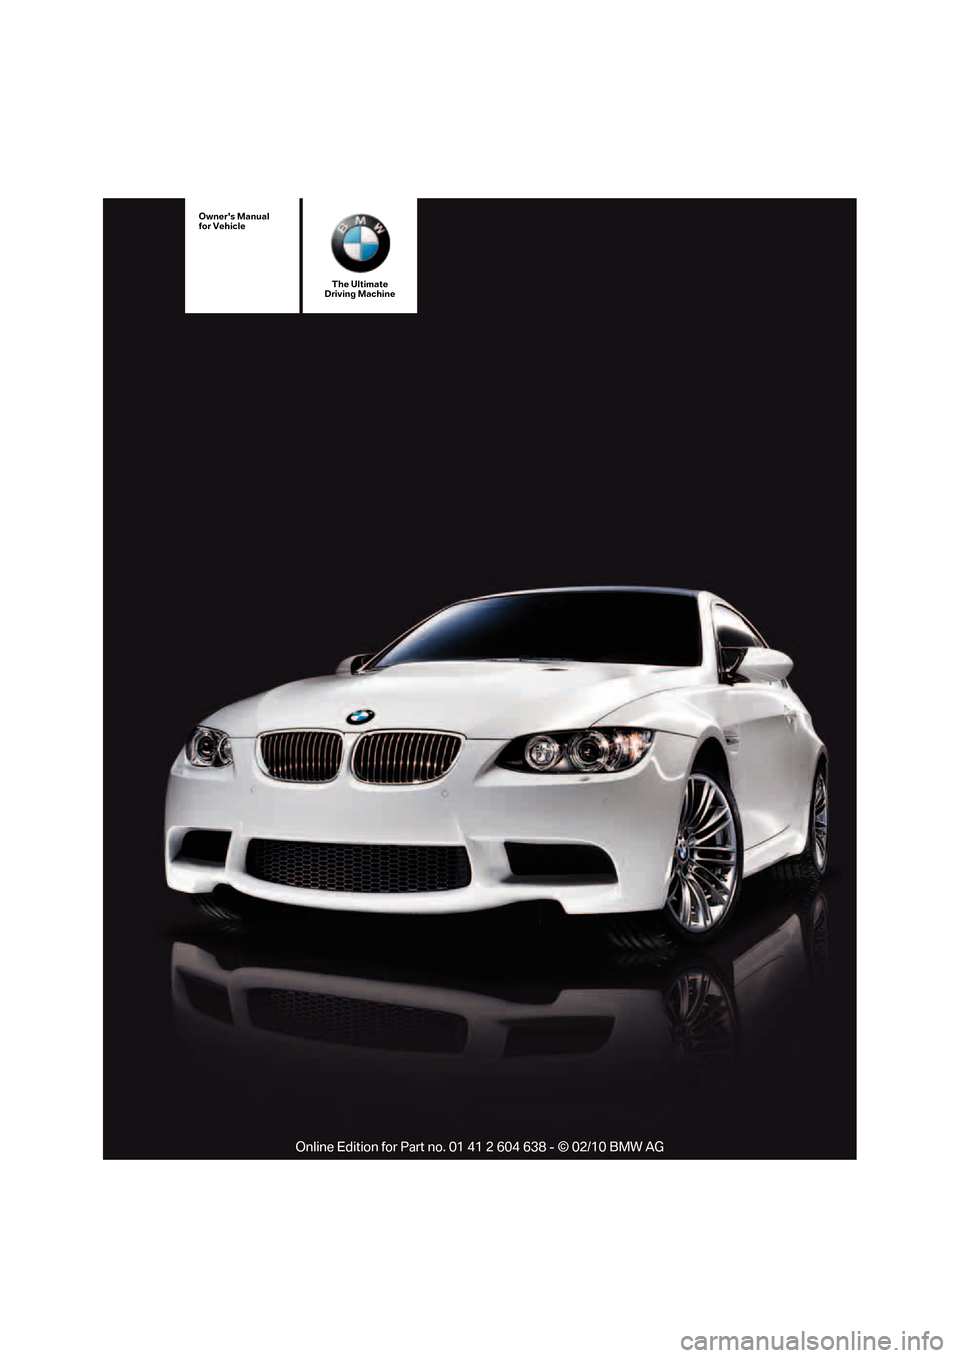 BMW M3 SEDAN 2011 E90 Owners Manual The Ultimate
Driving Machine
Owners Manual
for Vehicle 